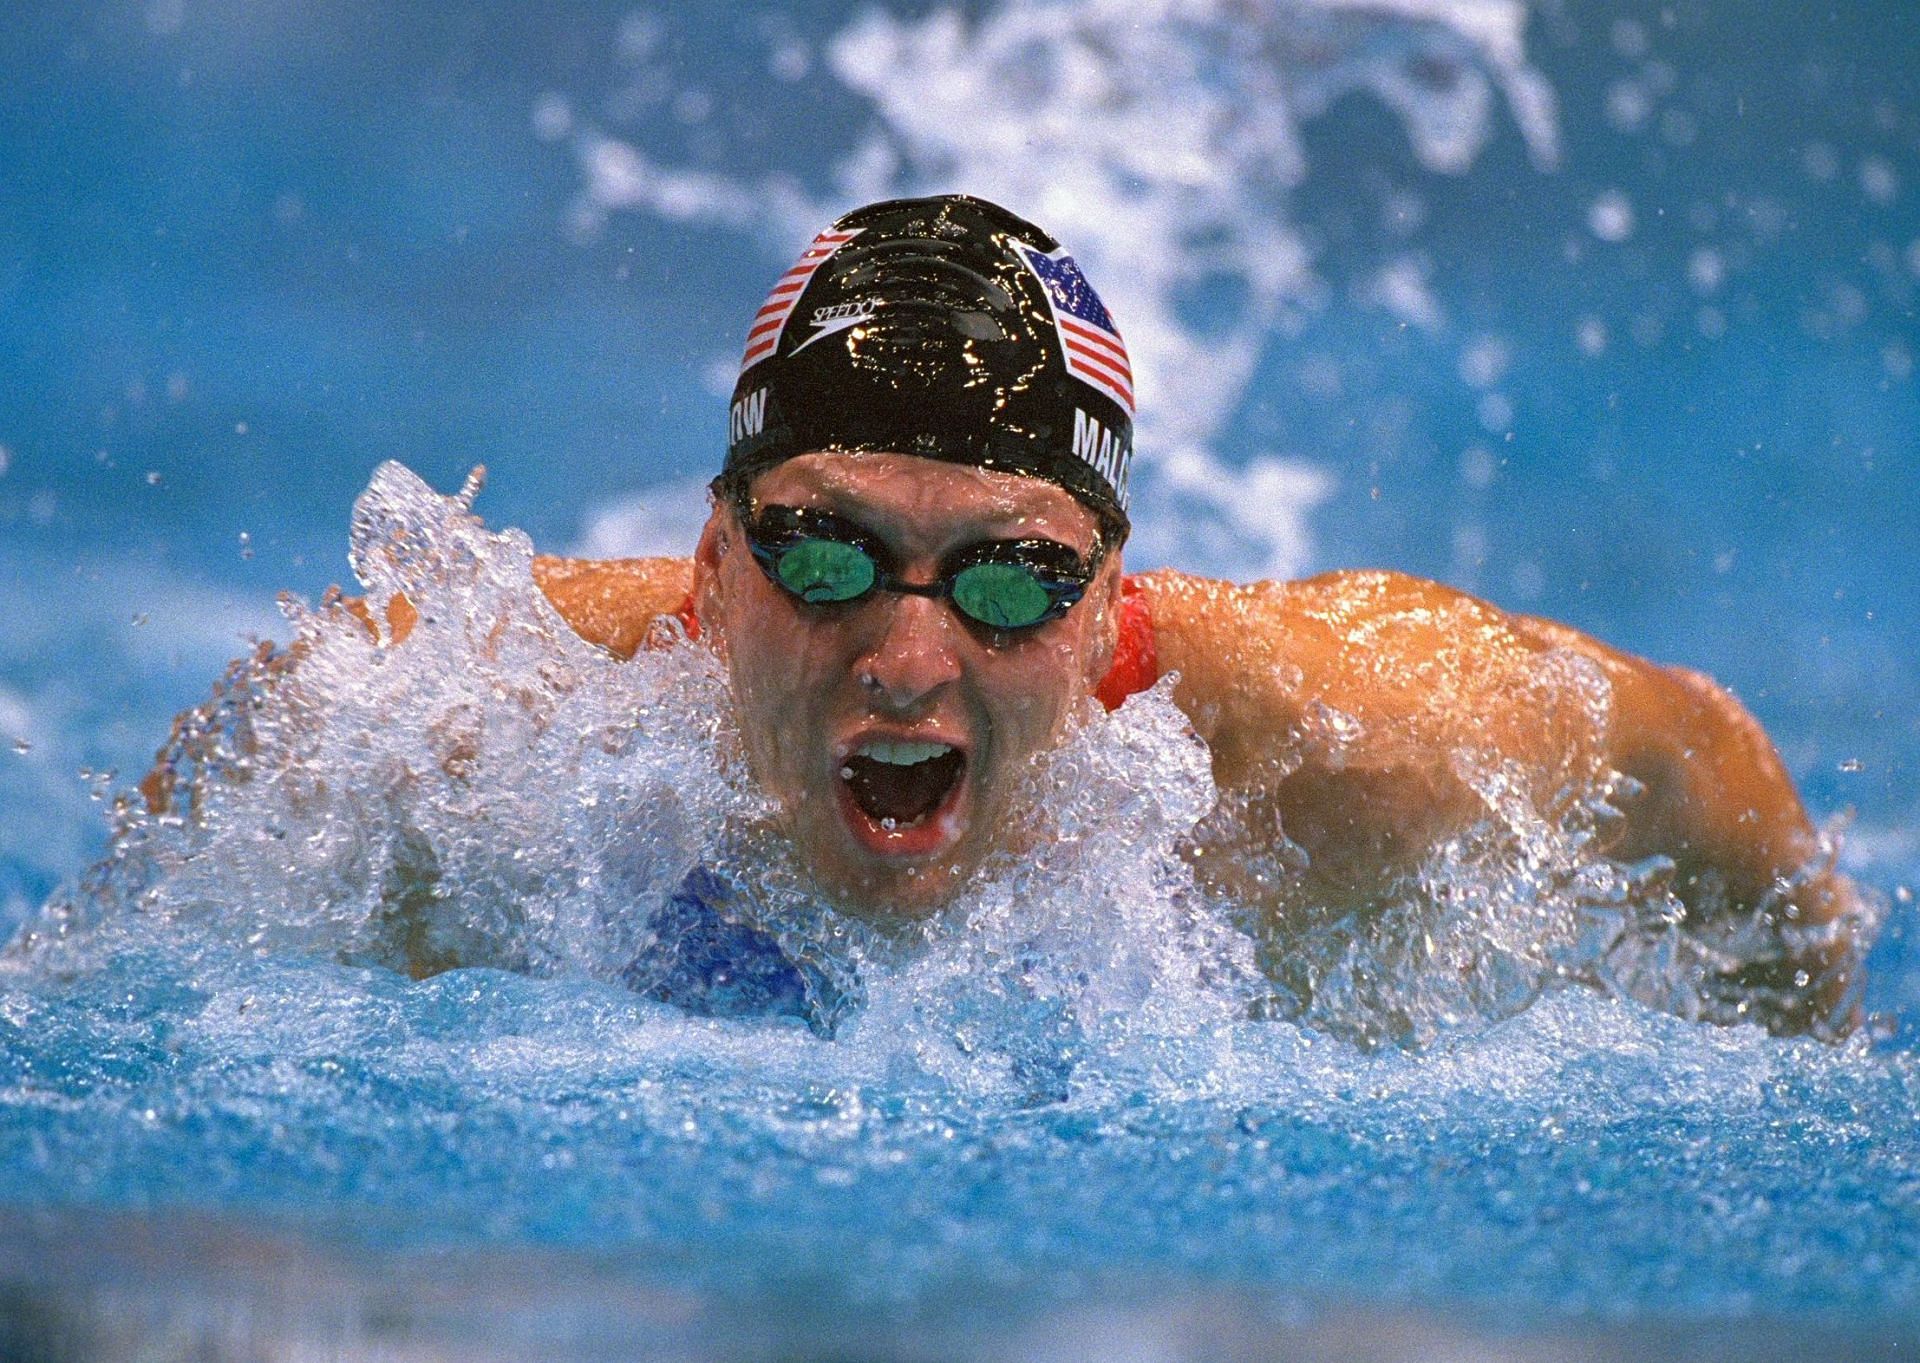 Tom Malchow in heat 6 of the 200m Butterfly at the 2001 World Championships